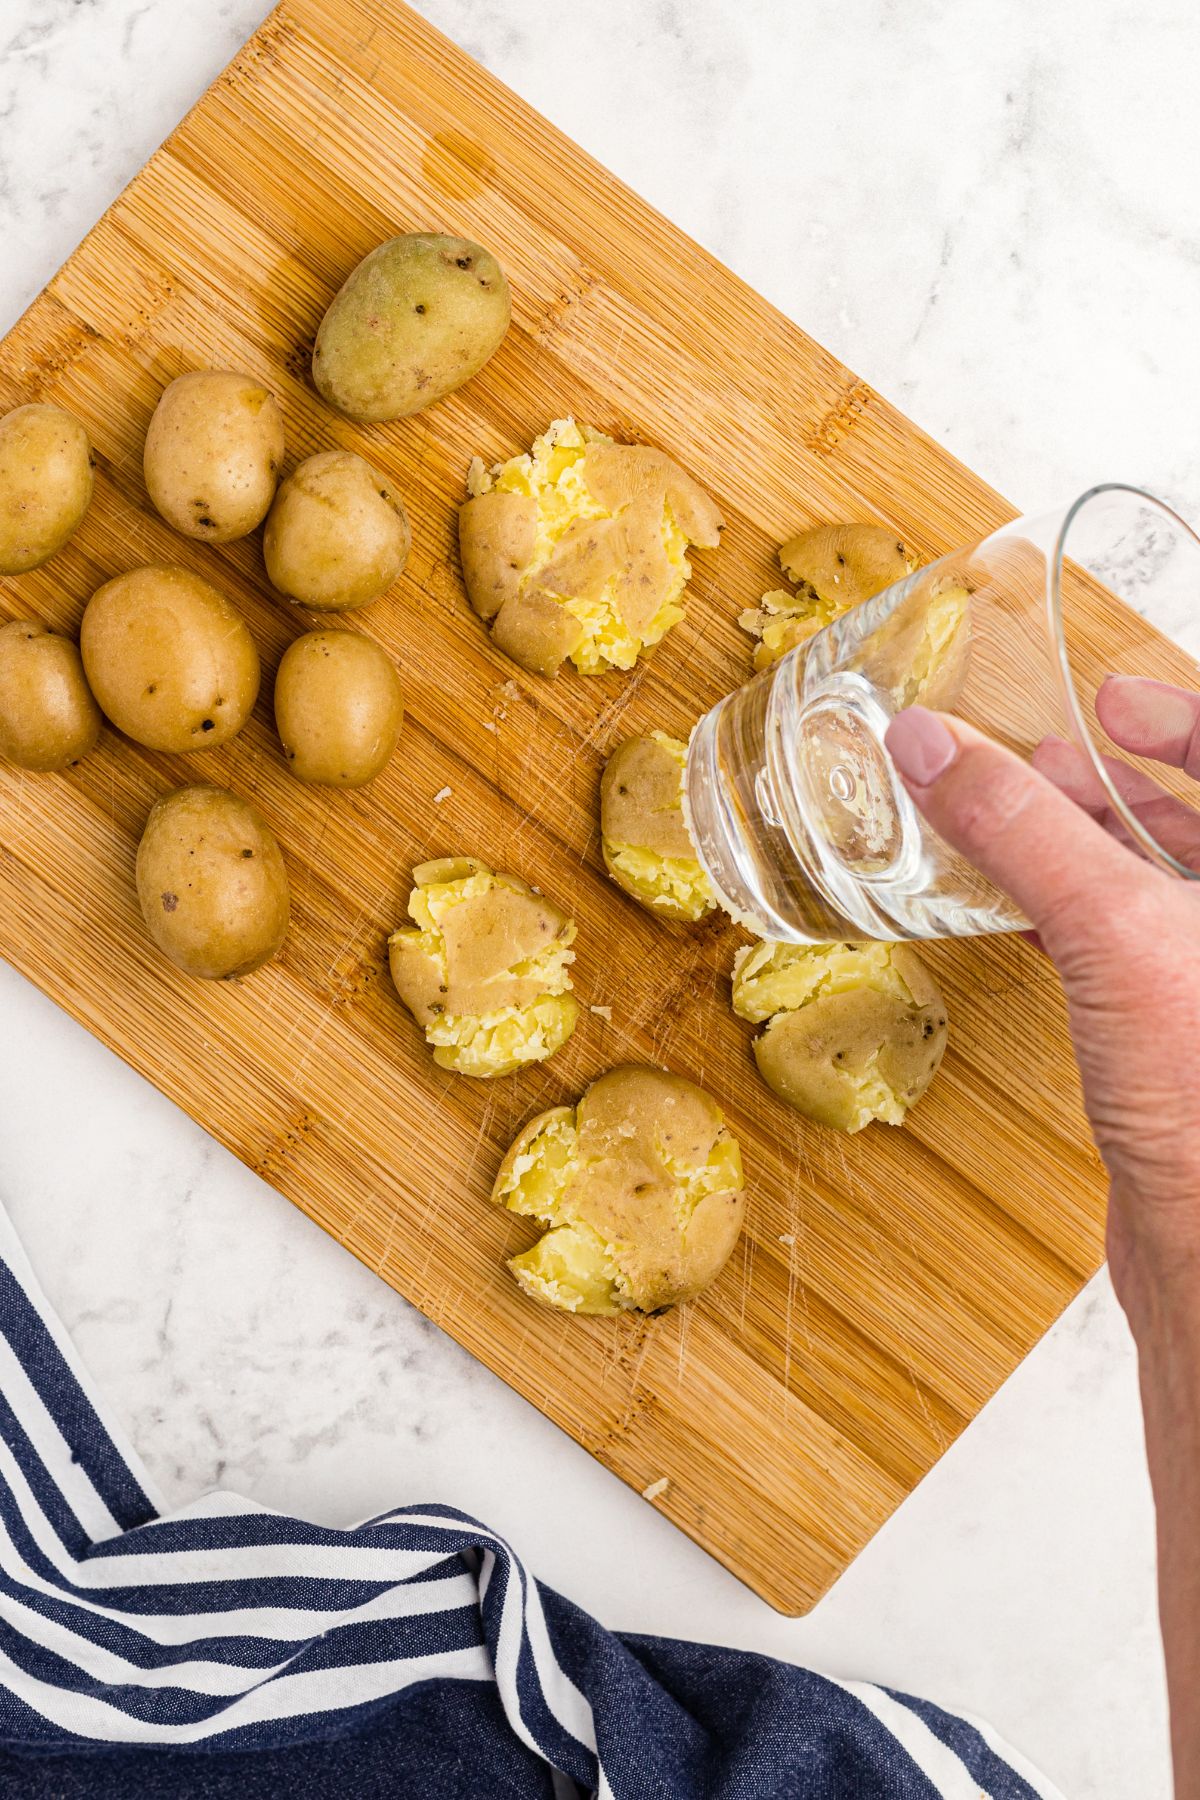 Soft golden potatoes on a wooden cutting board being smashed with a clear glass